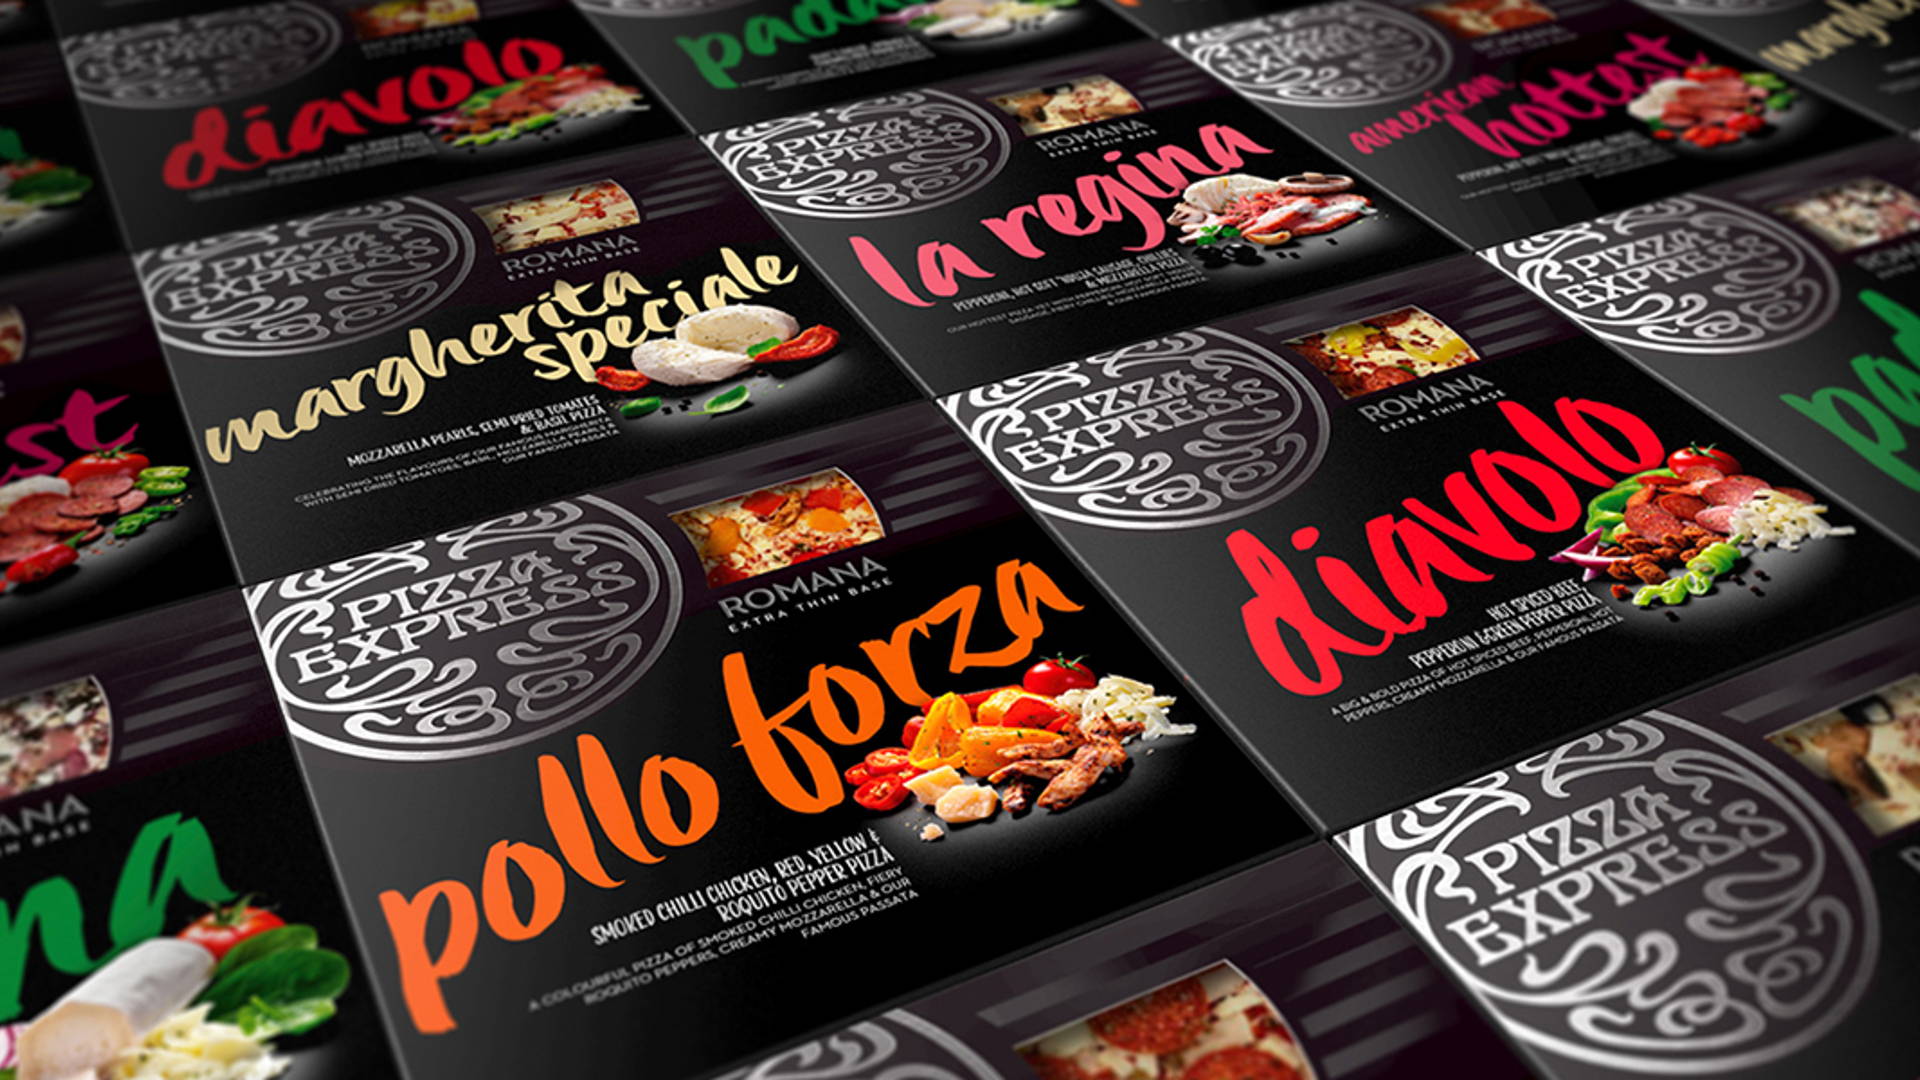 Featured image for PizzaExpress ‘At Home’ range